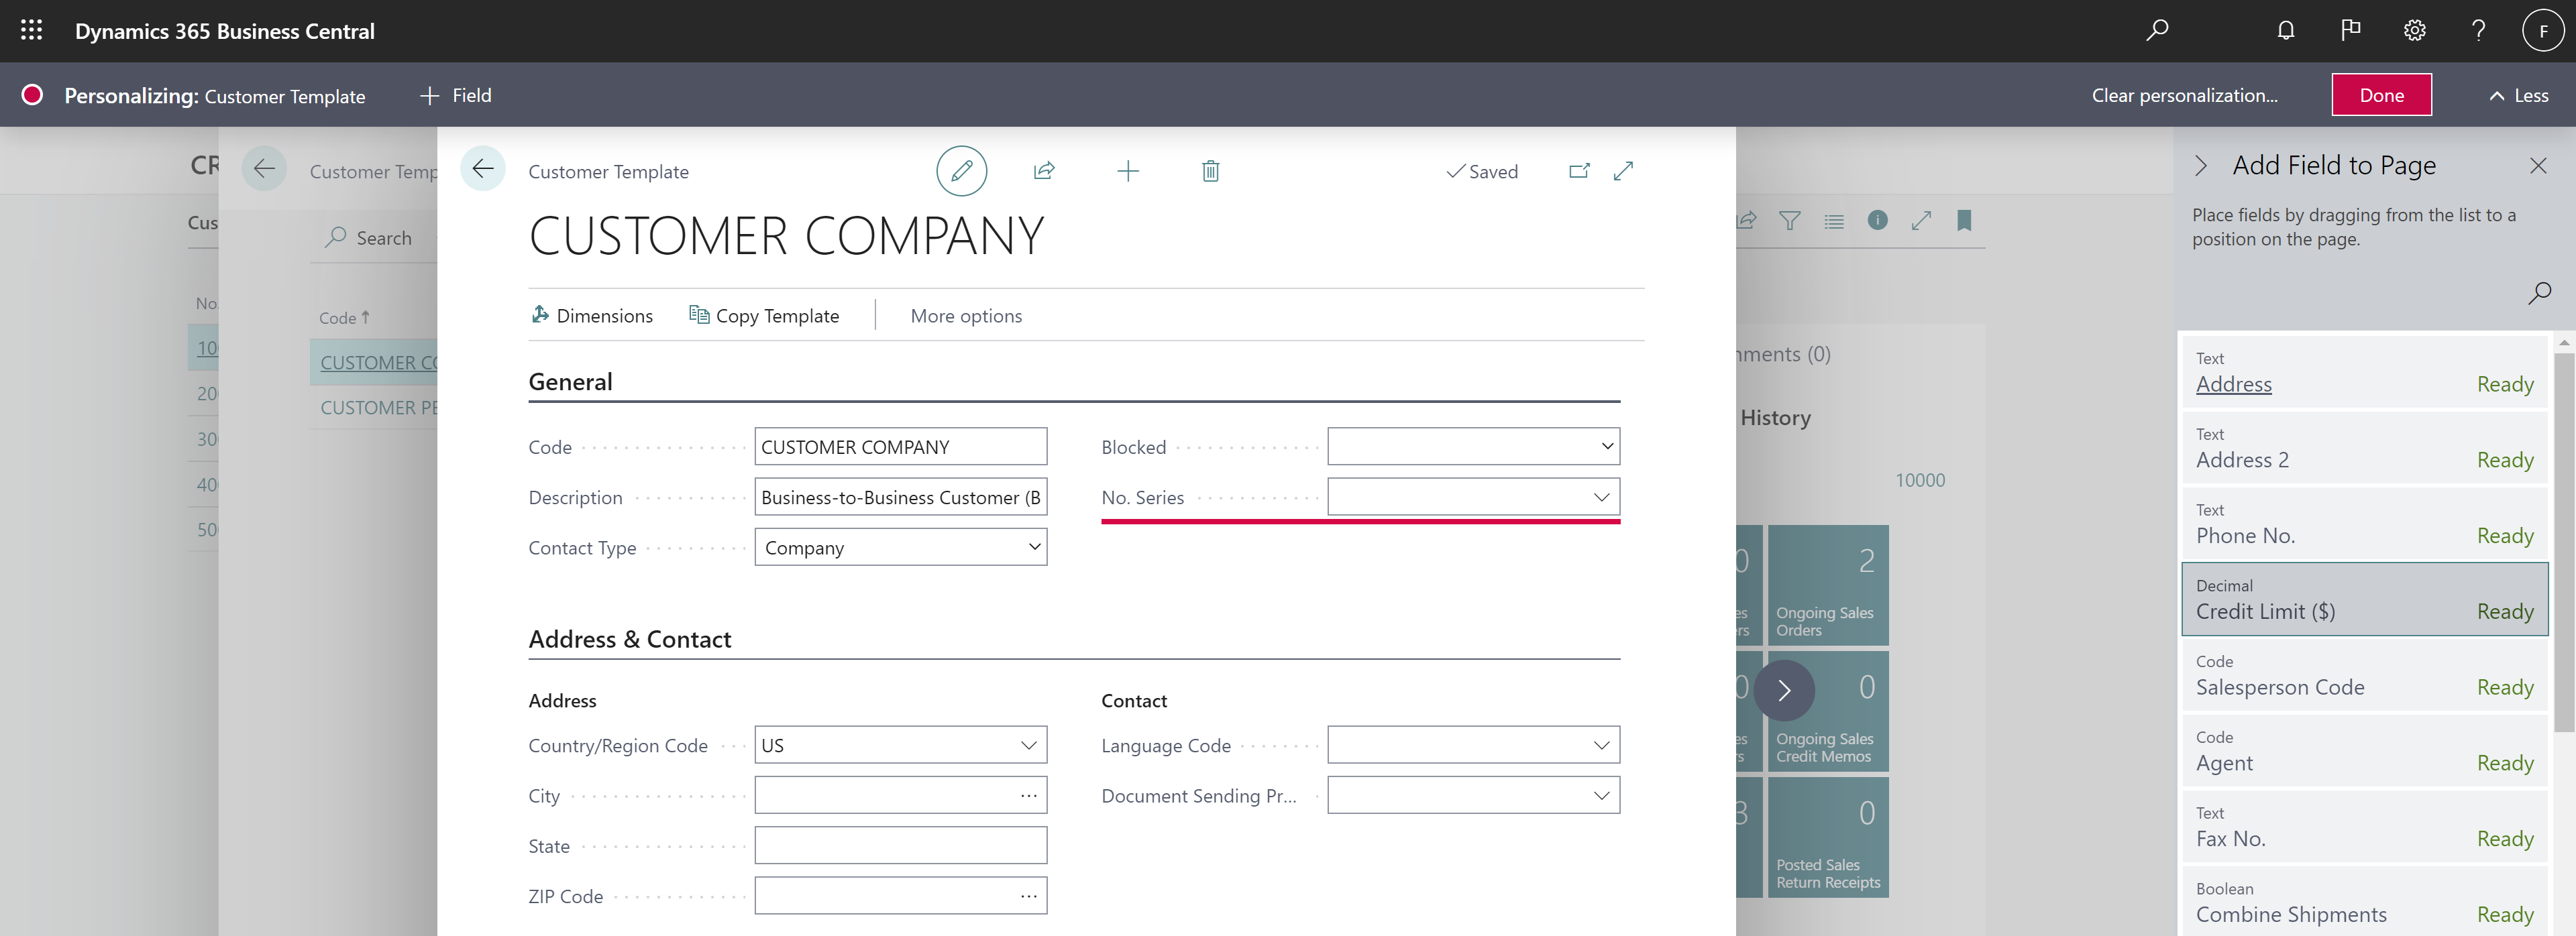 Shows how users can add new fields to customer templates using personalization banner.